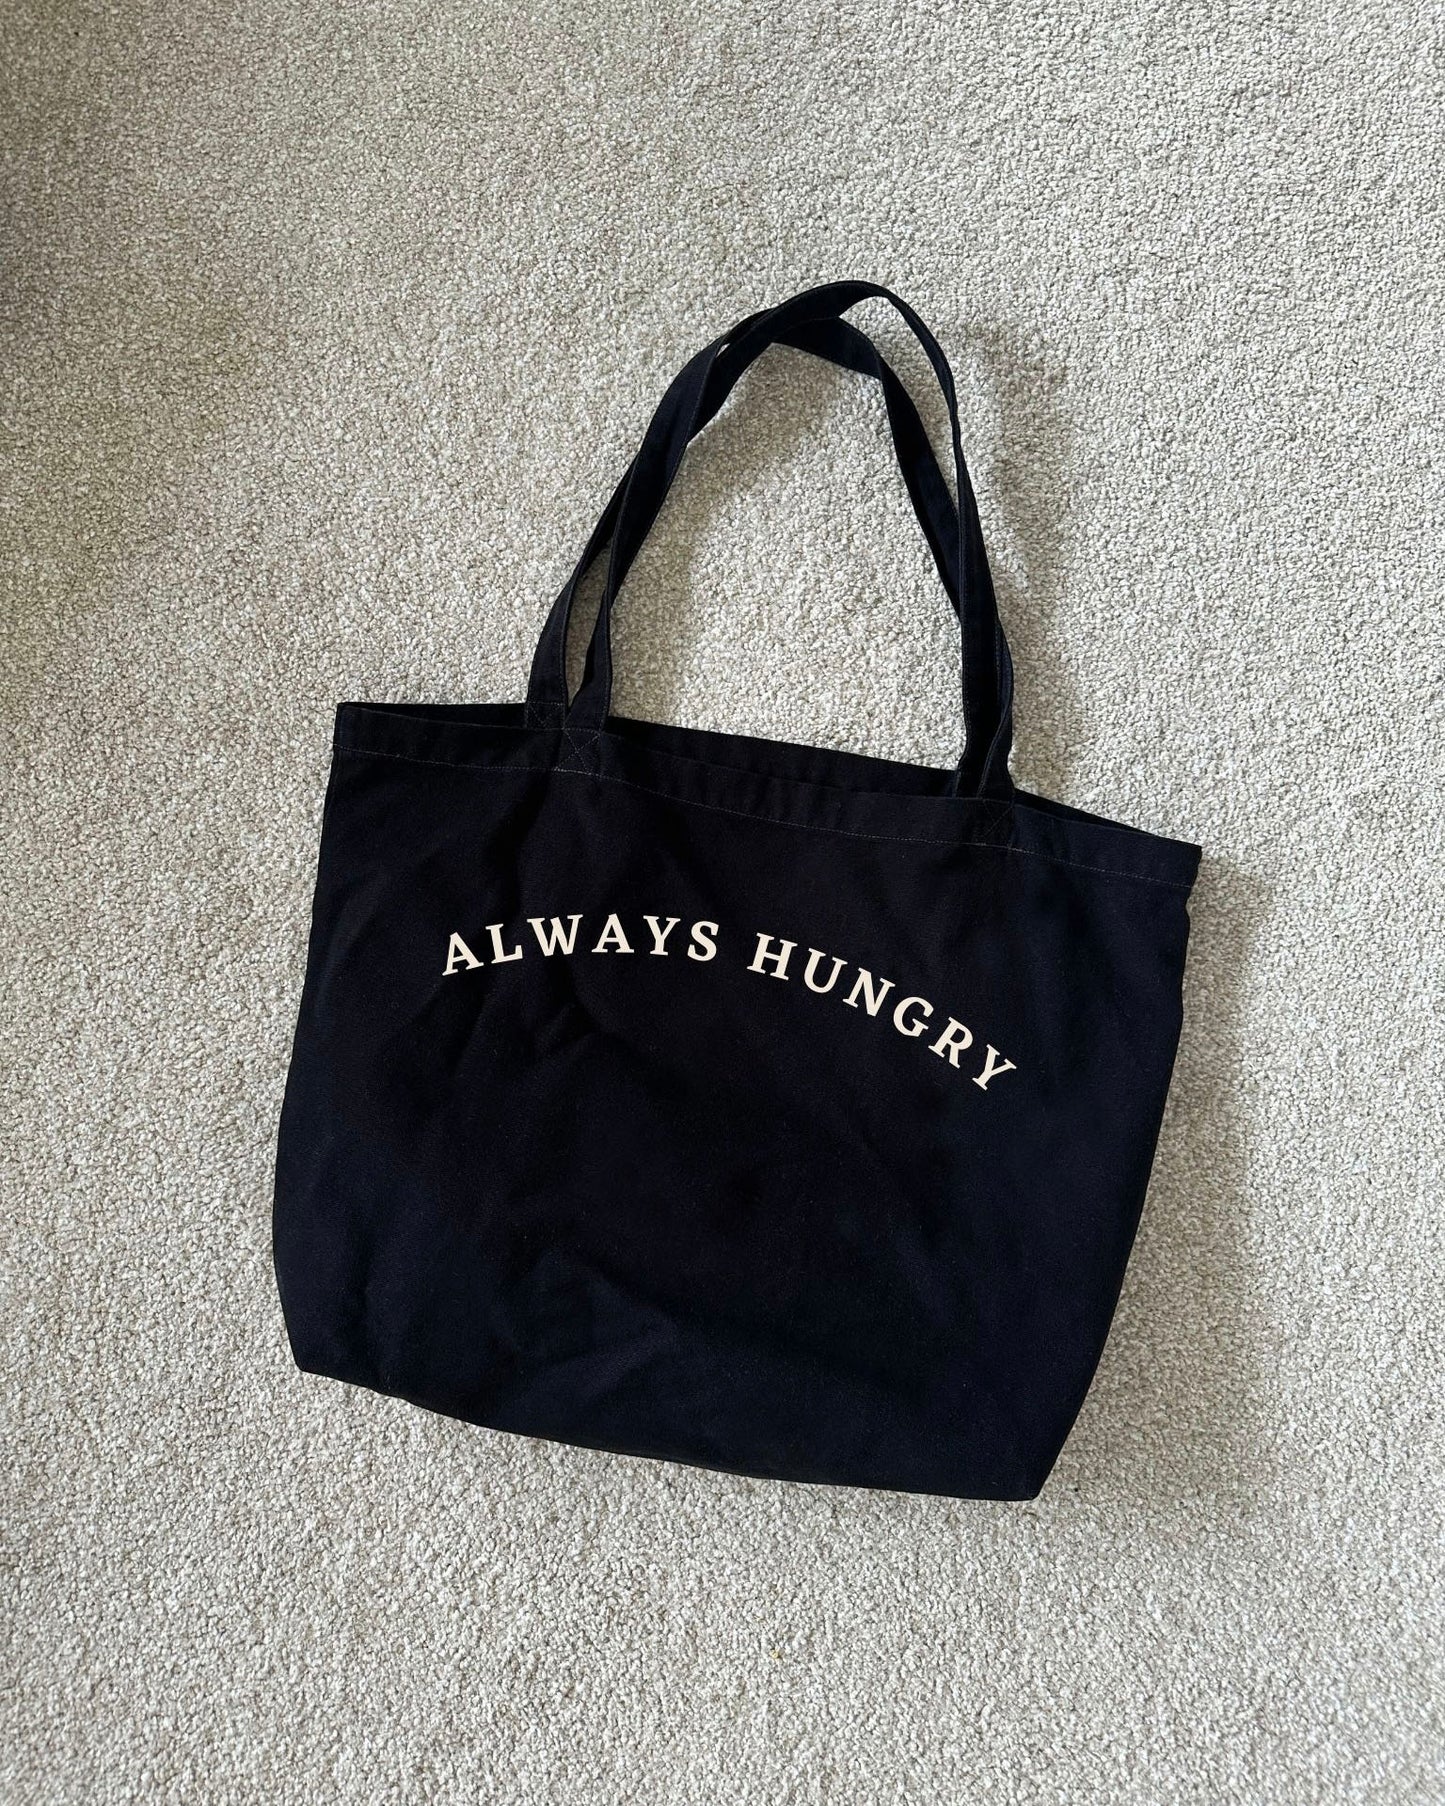 Always hungry tote bag